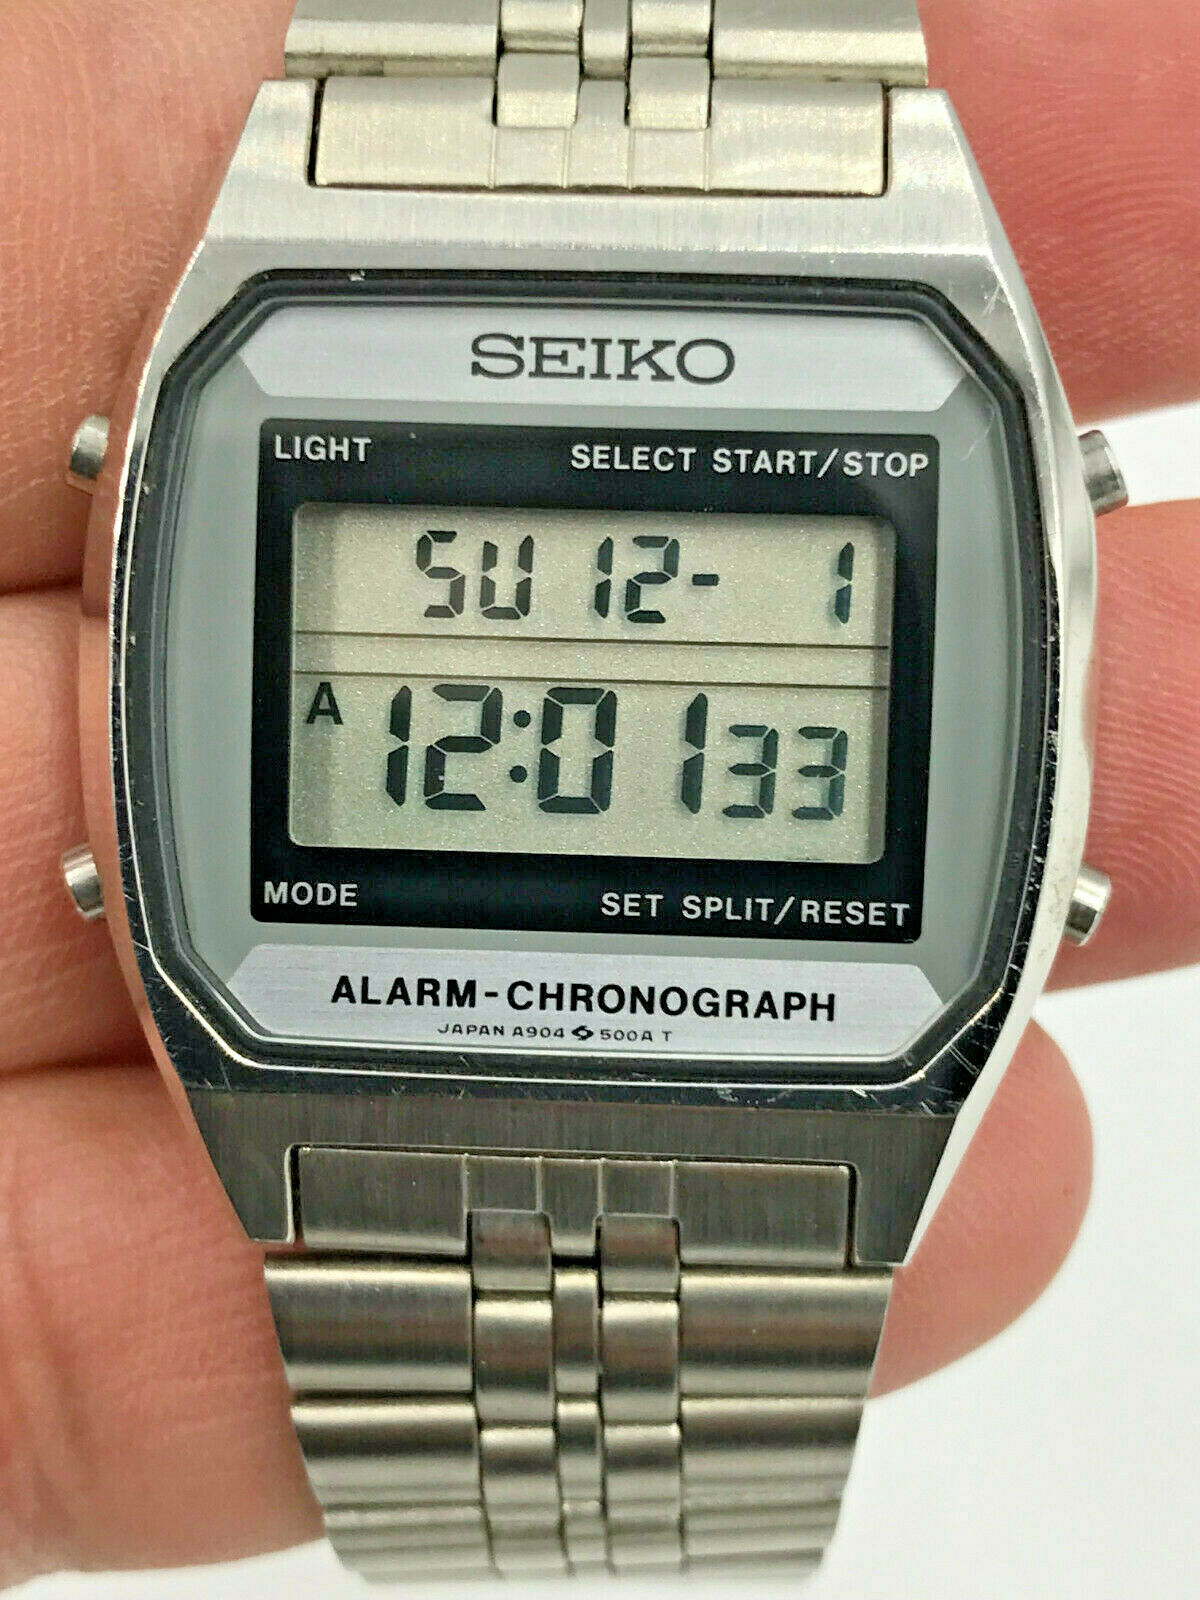 SEIKO WATCH LCD A904-5009 A2 1987 ALARM CHRONO WORKING NEW BATTERY VINTAGE  | WatchCharts